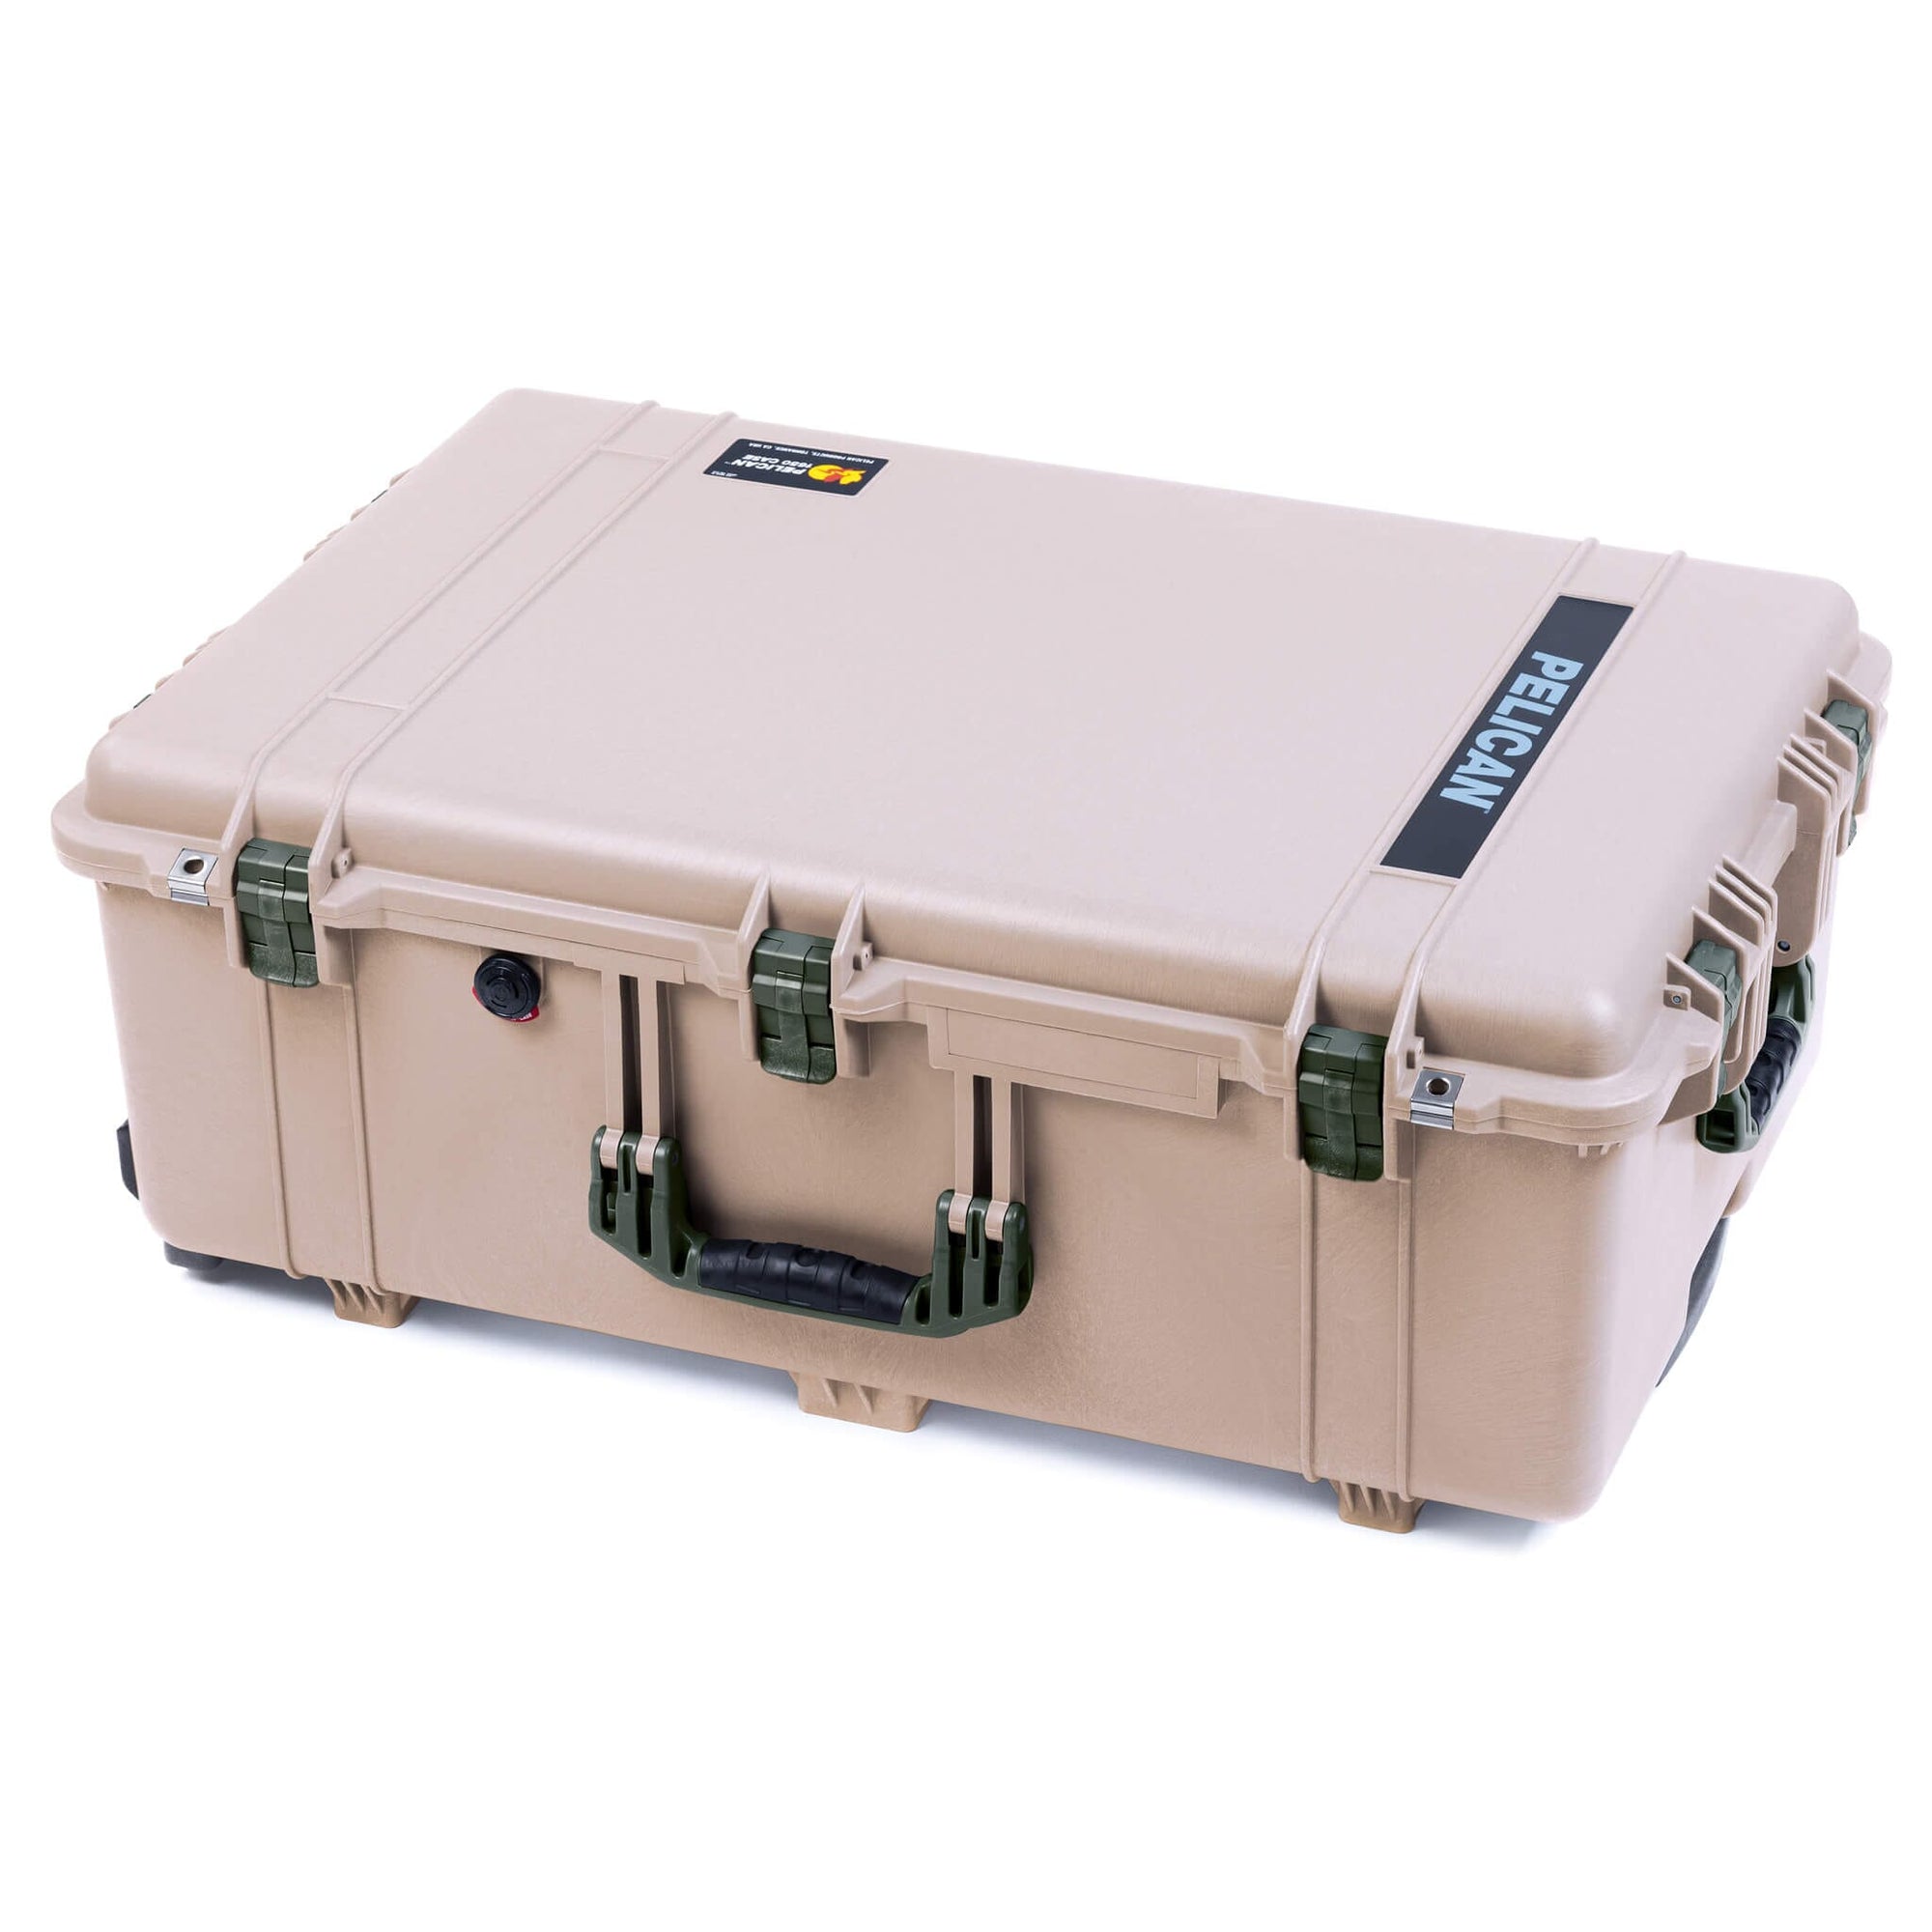 Pelican 1650 Case, Desert Tan with OD Green Handles & Latches ColorCase 